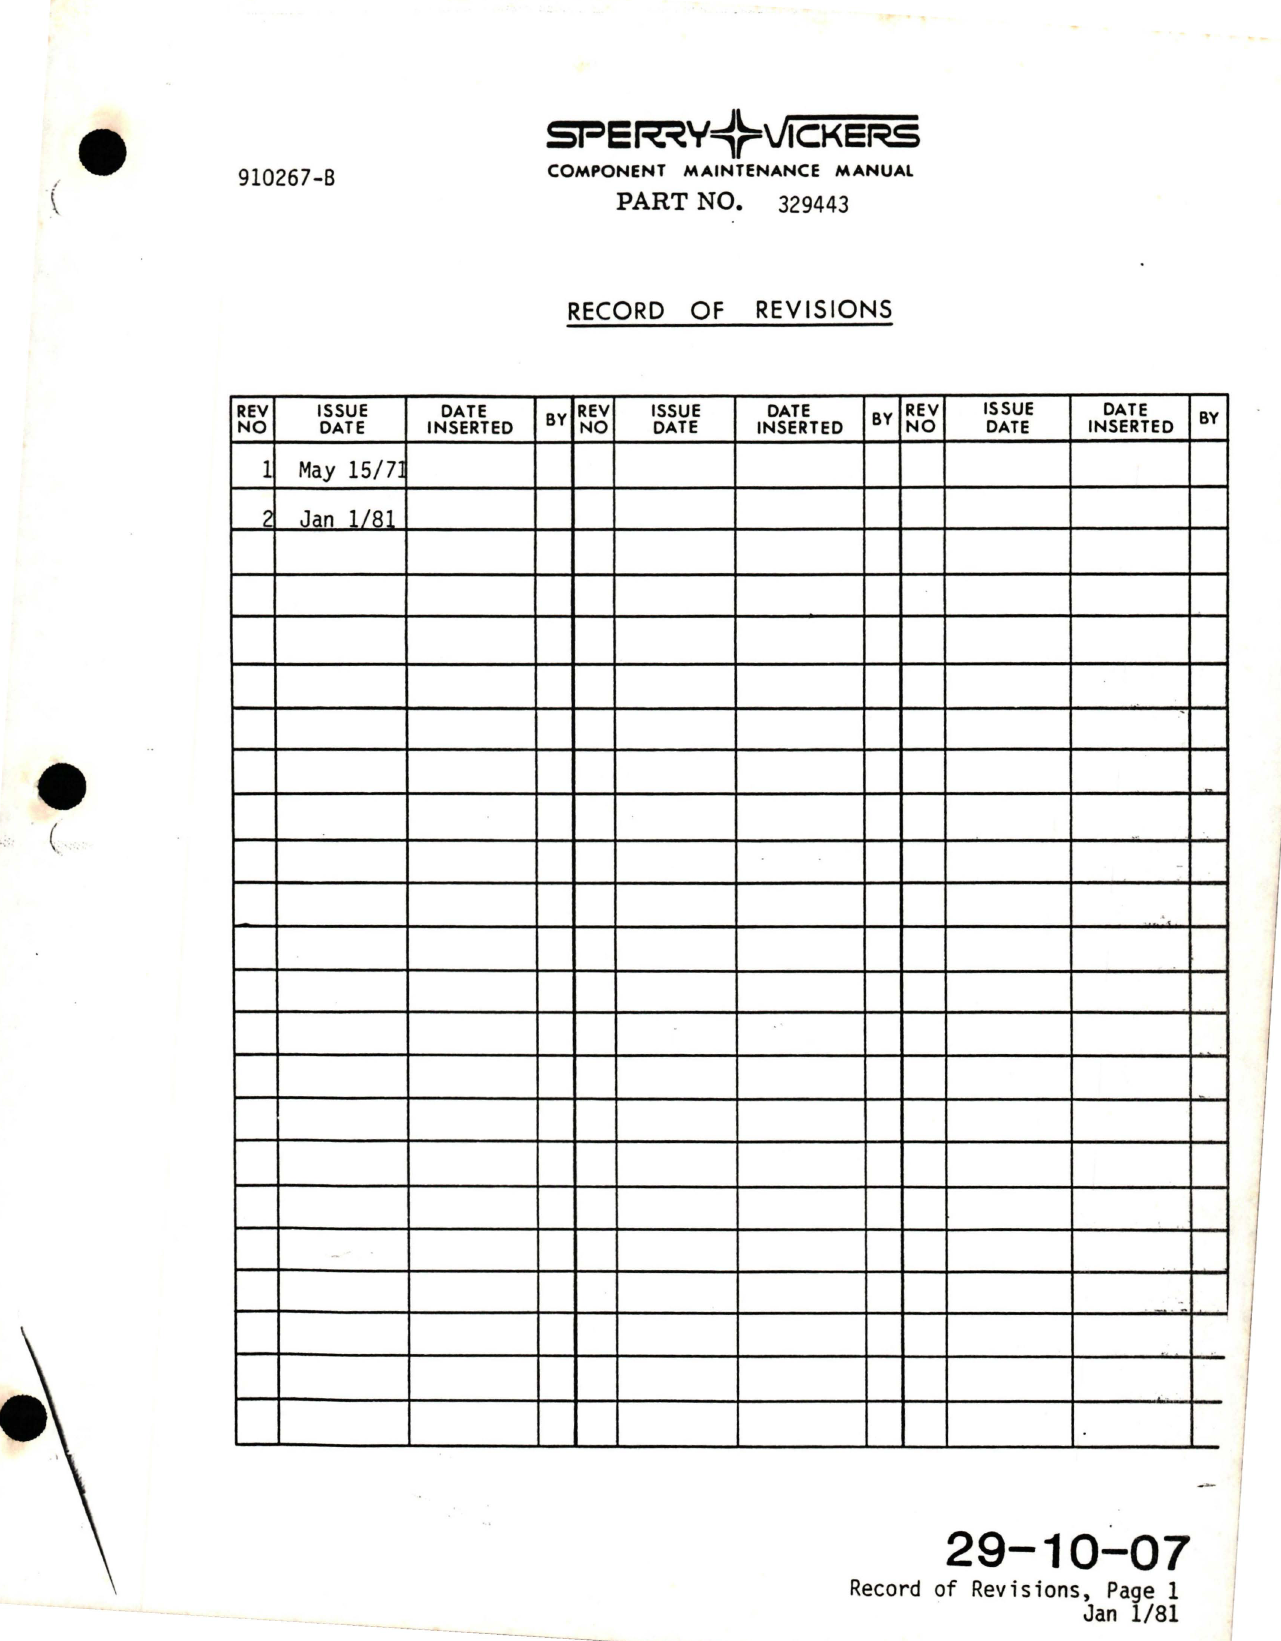 Sample page 9 from AirCorps Library document: Maintenance with Illustrated Parts List for Electric Motor Subassembly for Hydraulic Motorpump - Model MPEV3-022-5 - Part 329443 